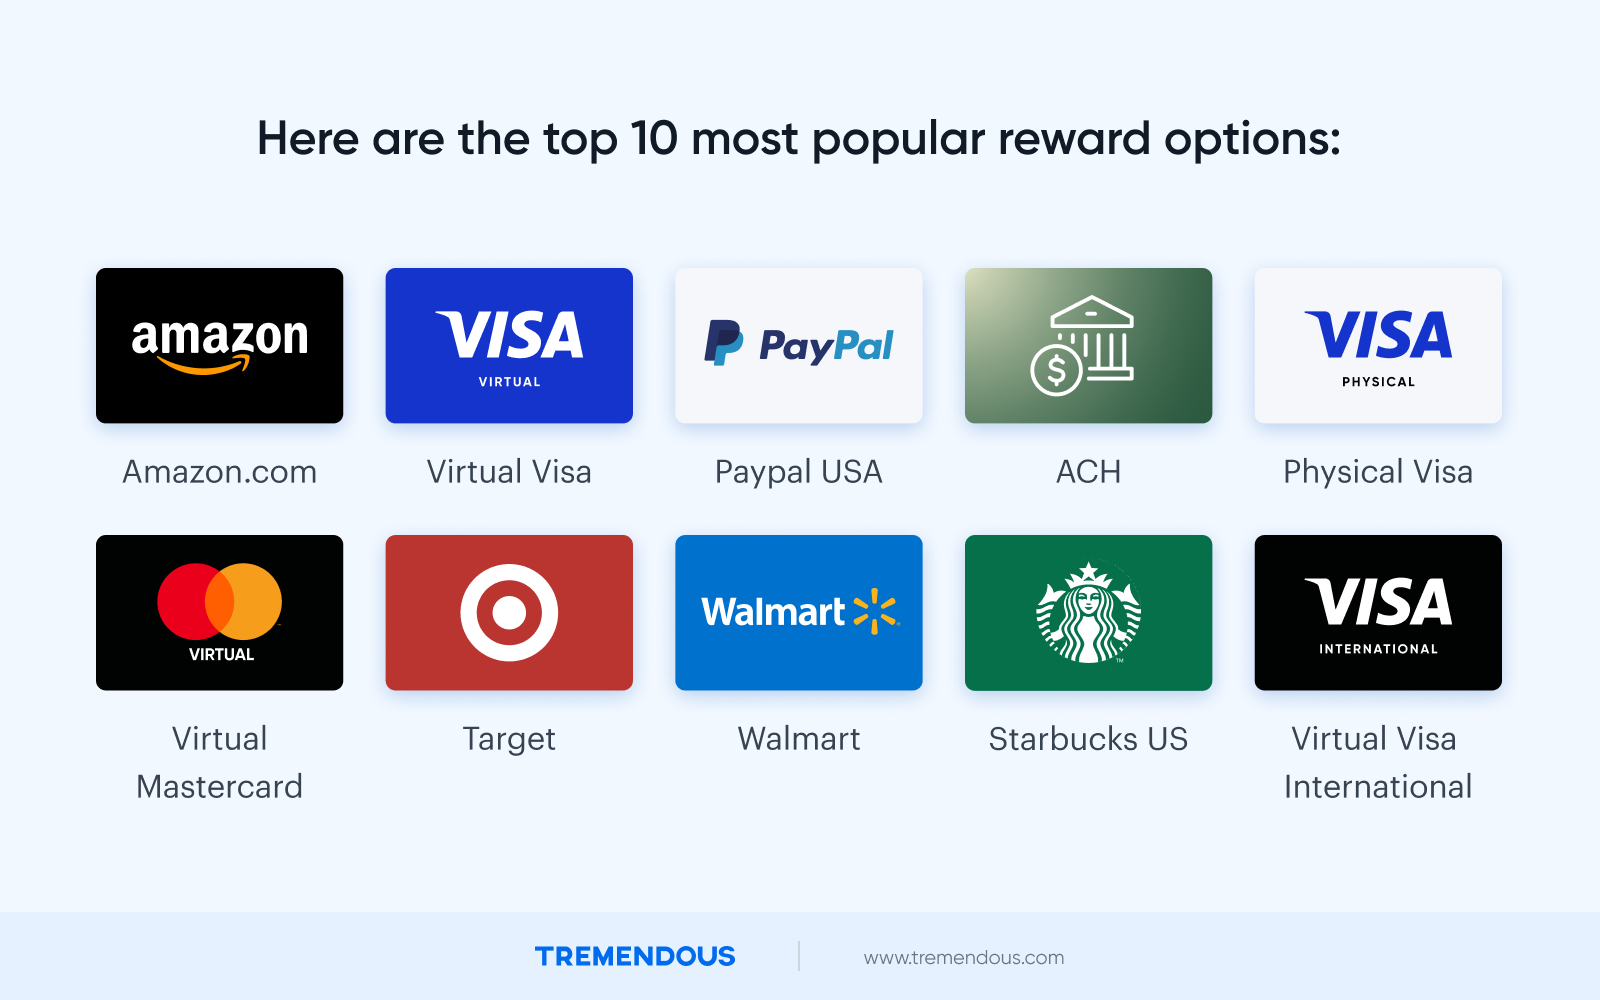 A list of the most popular redemption options including: Amazon gift cards, Visa gift cards, PayPal, ACH transfer, Physical Visa cards, Virtual Mastercards, Target gift cards, Walmart gift cards, Starbucks US git cards, and Virtual Visa International gift cards.